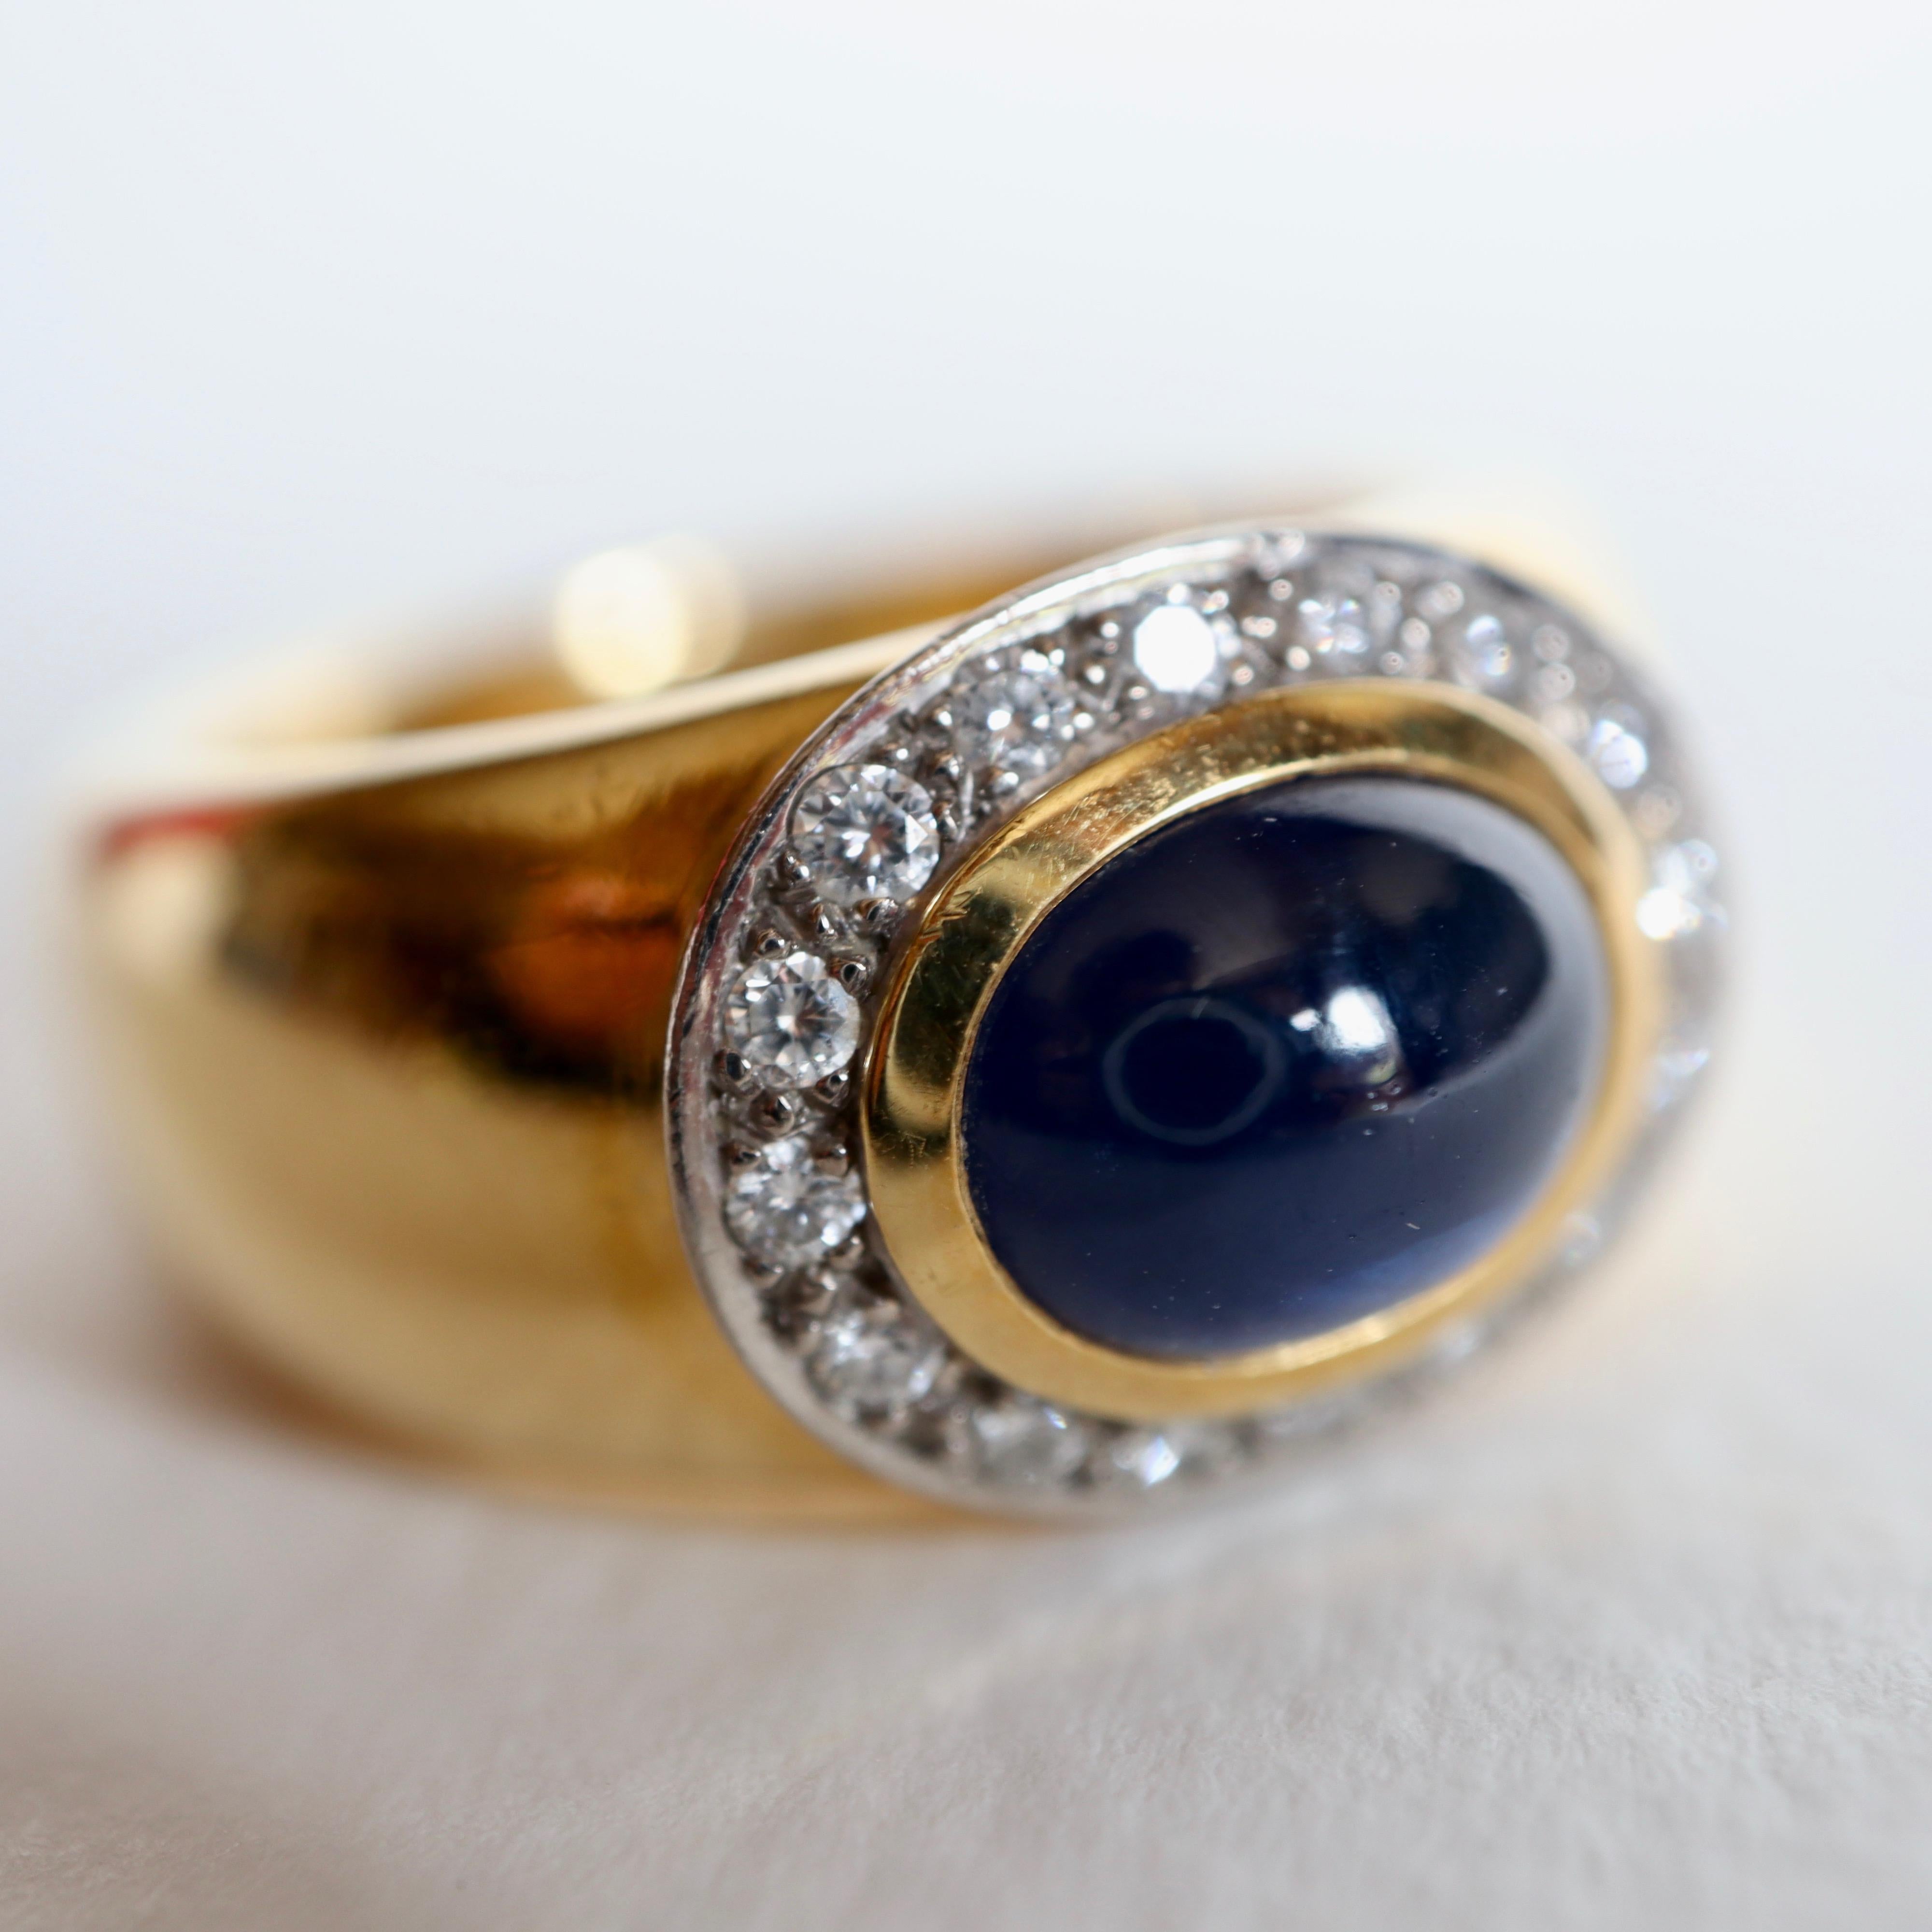 WEMPE Ring in Yellow and White 18 Carat Gold setting a Sapphire Cabochon with entourage of 16 Diamonds of 0.02 Carat each for a total of 0.3 Carat.
Signed Wempé and Numbered 4690 
Traces of Wear on the underside of the Ring
Dimensions of Sapphire 9